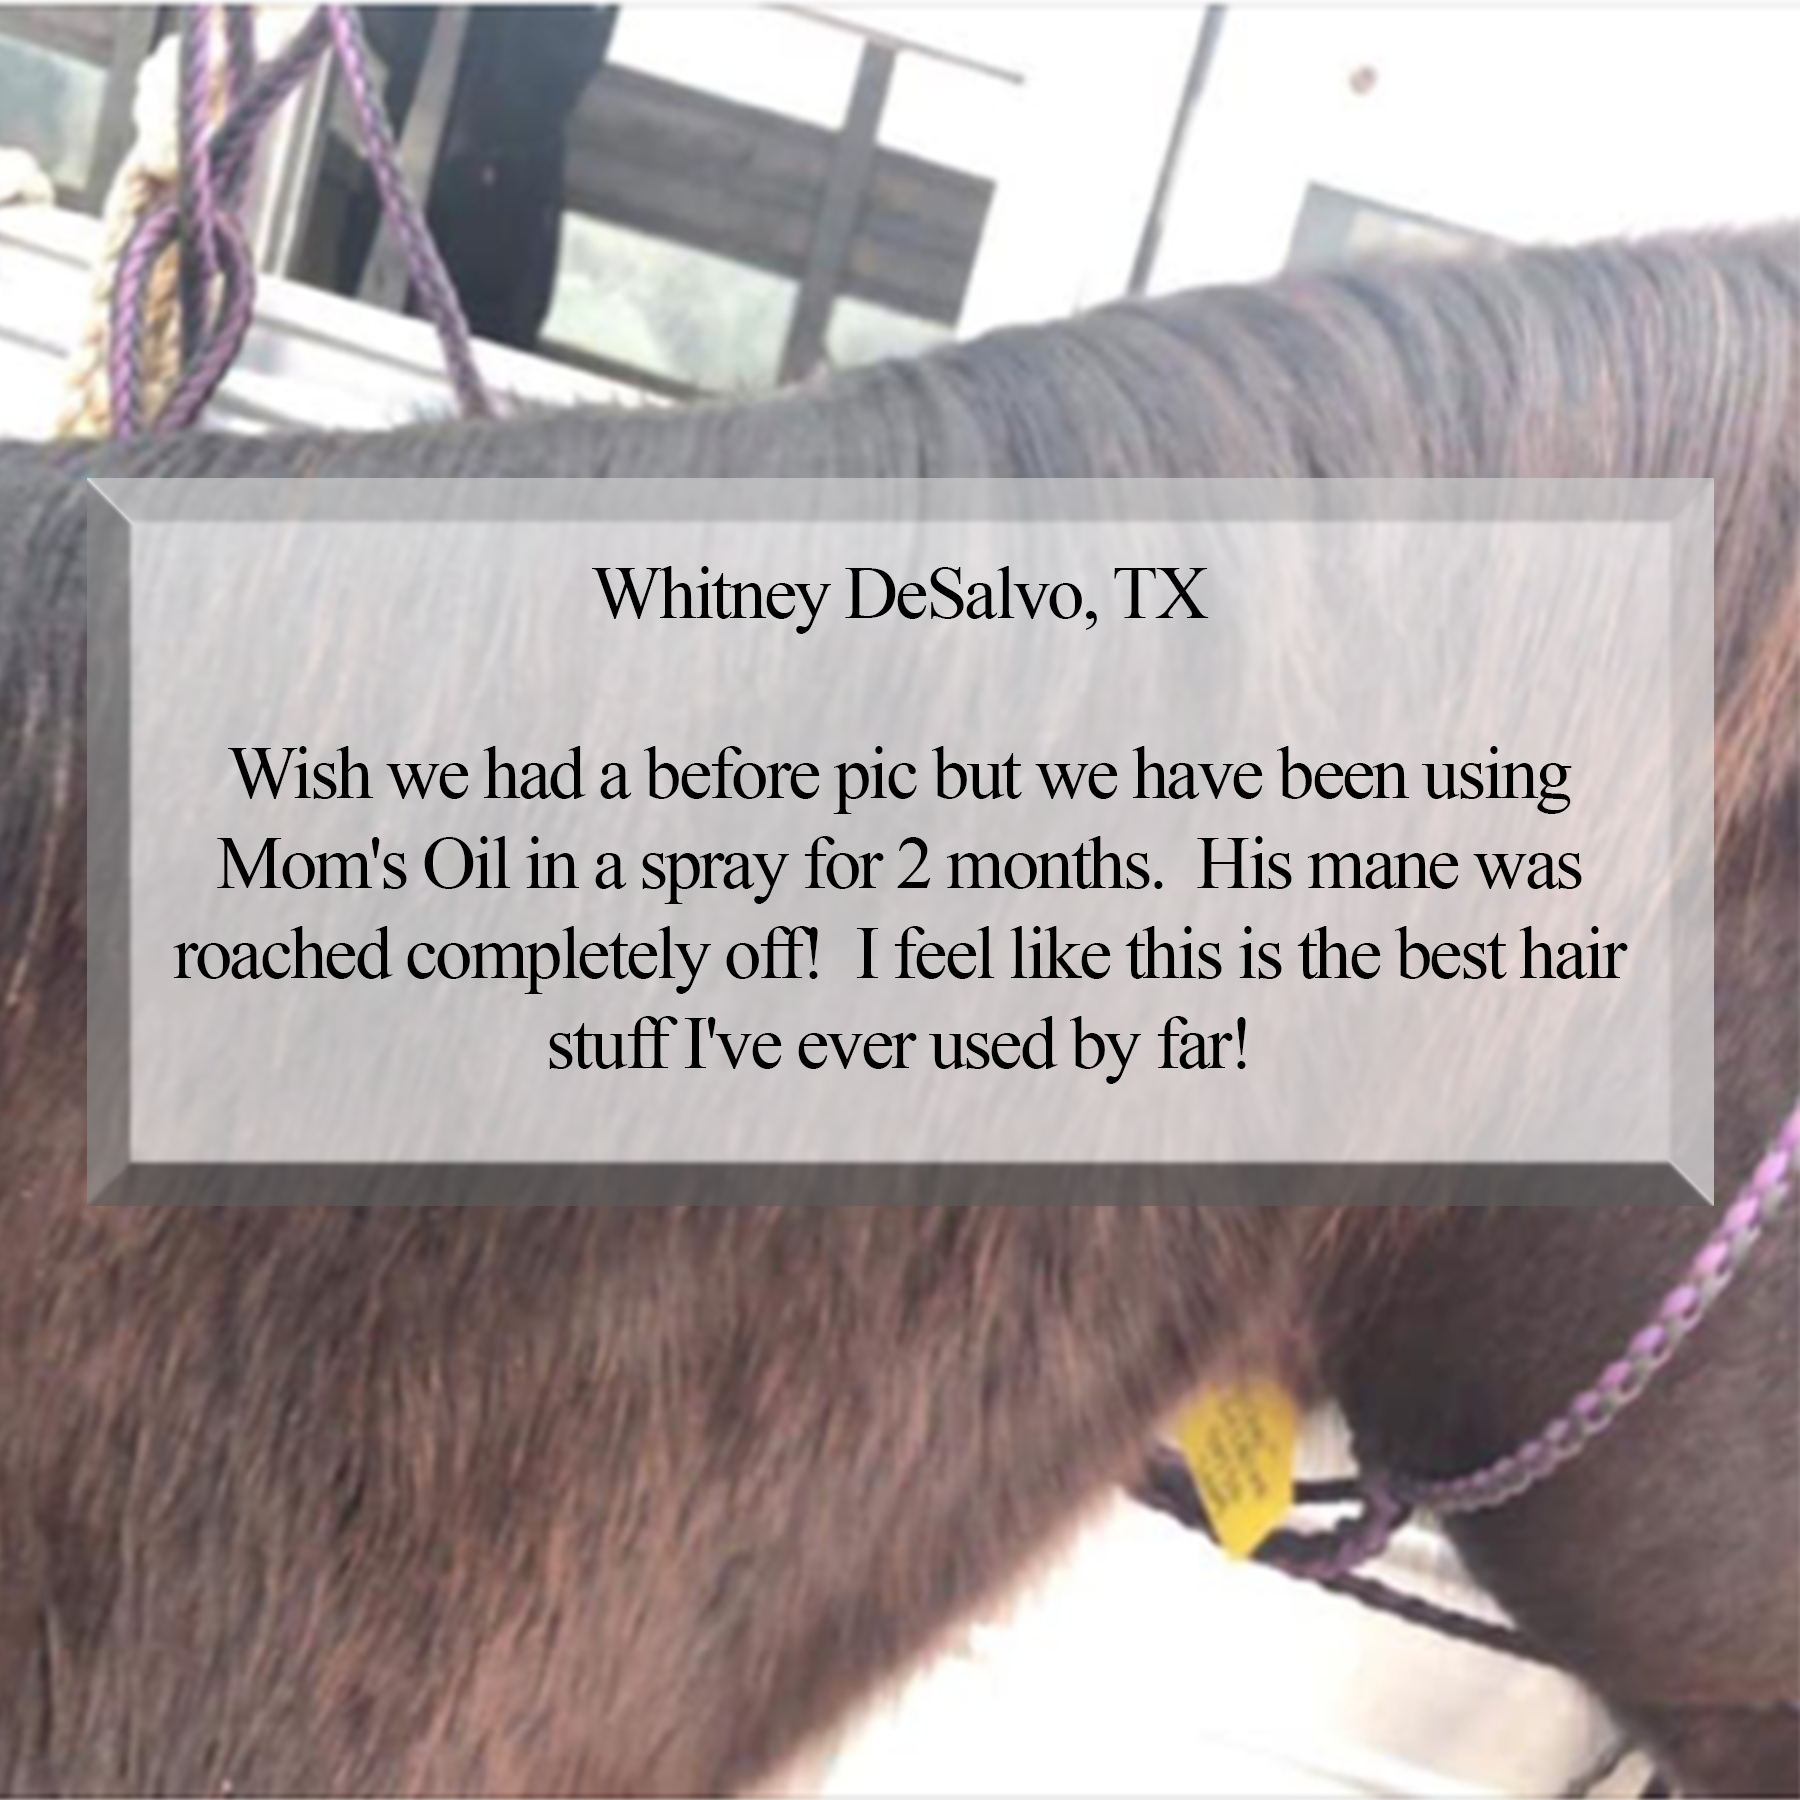 Wish we had a before pic but we have been using Mom's Oil for 2 months.  His mane was roached completely off!  I feel like this is the best hair stuff  I've used by far!  Whitney DeSalvo, TX